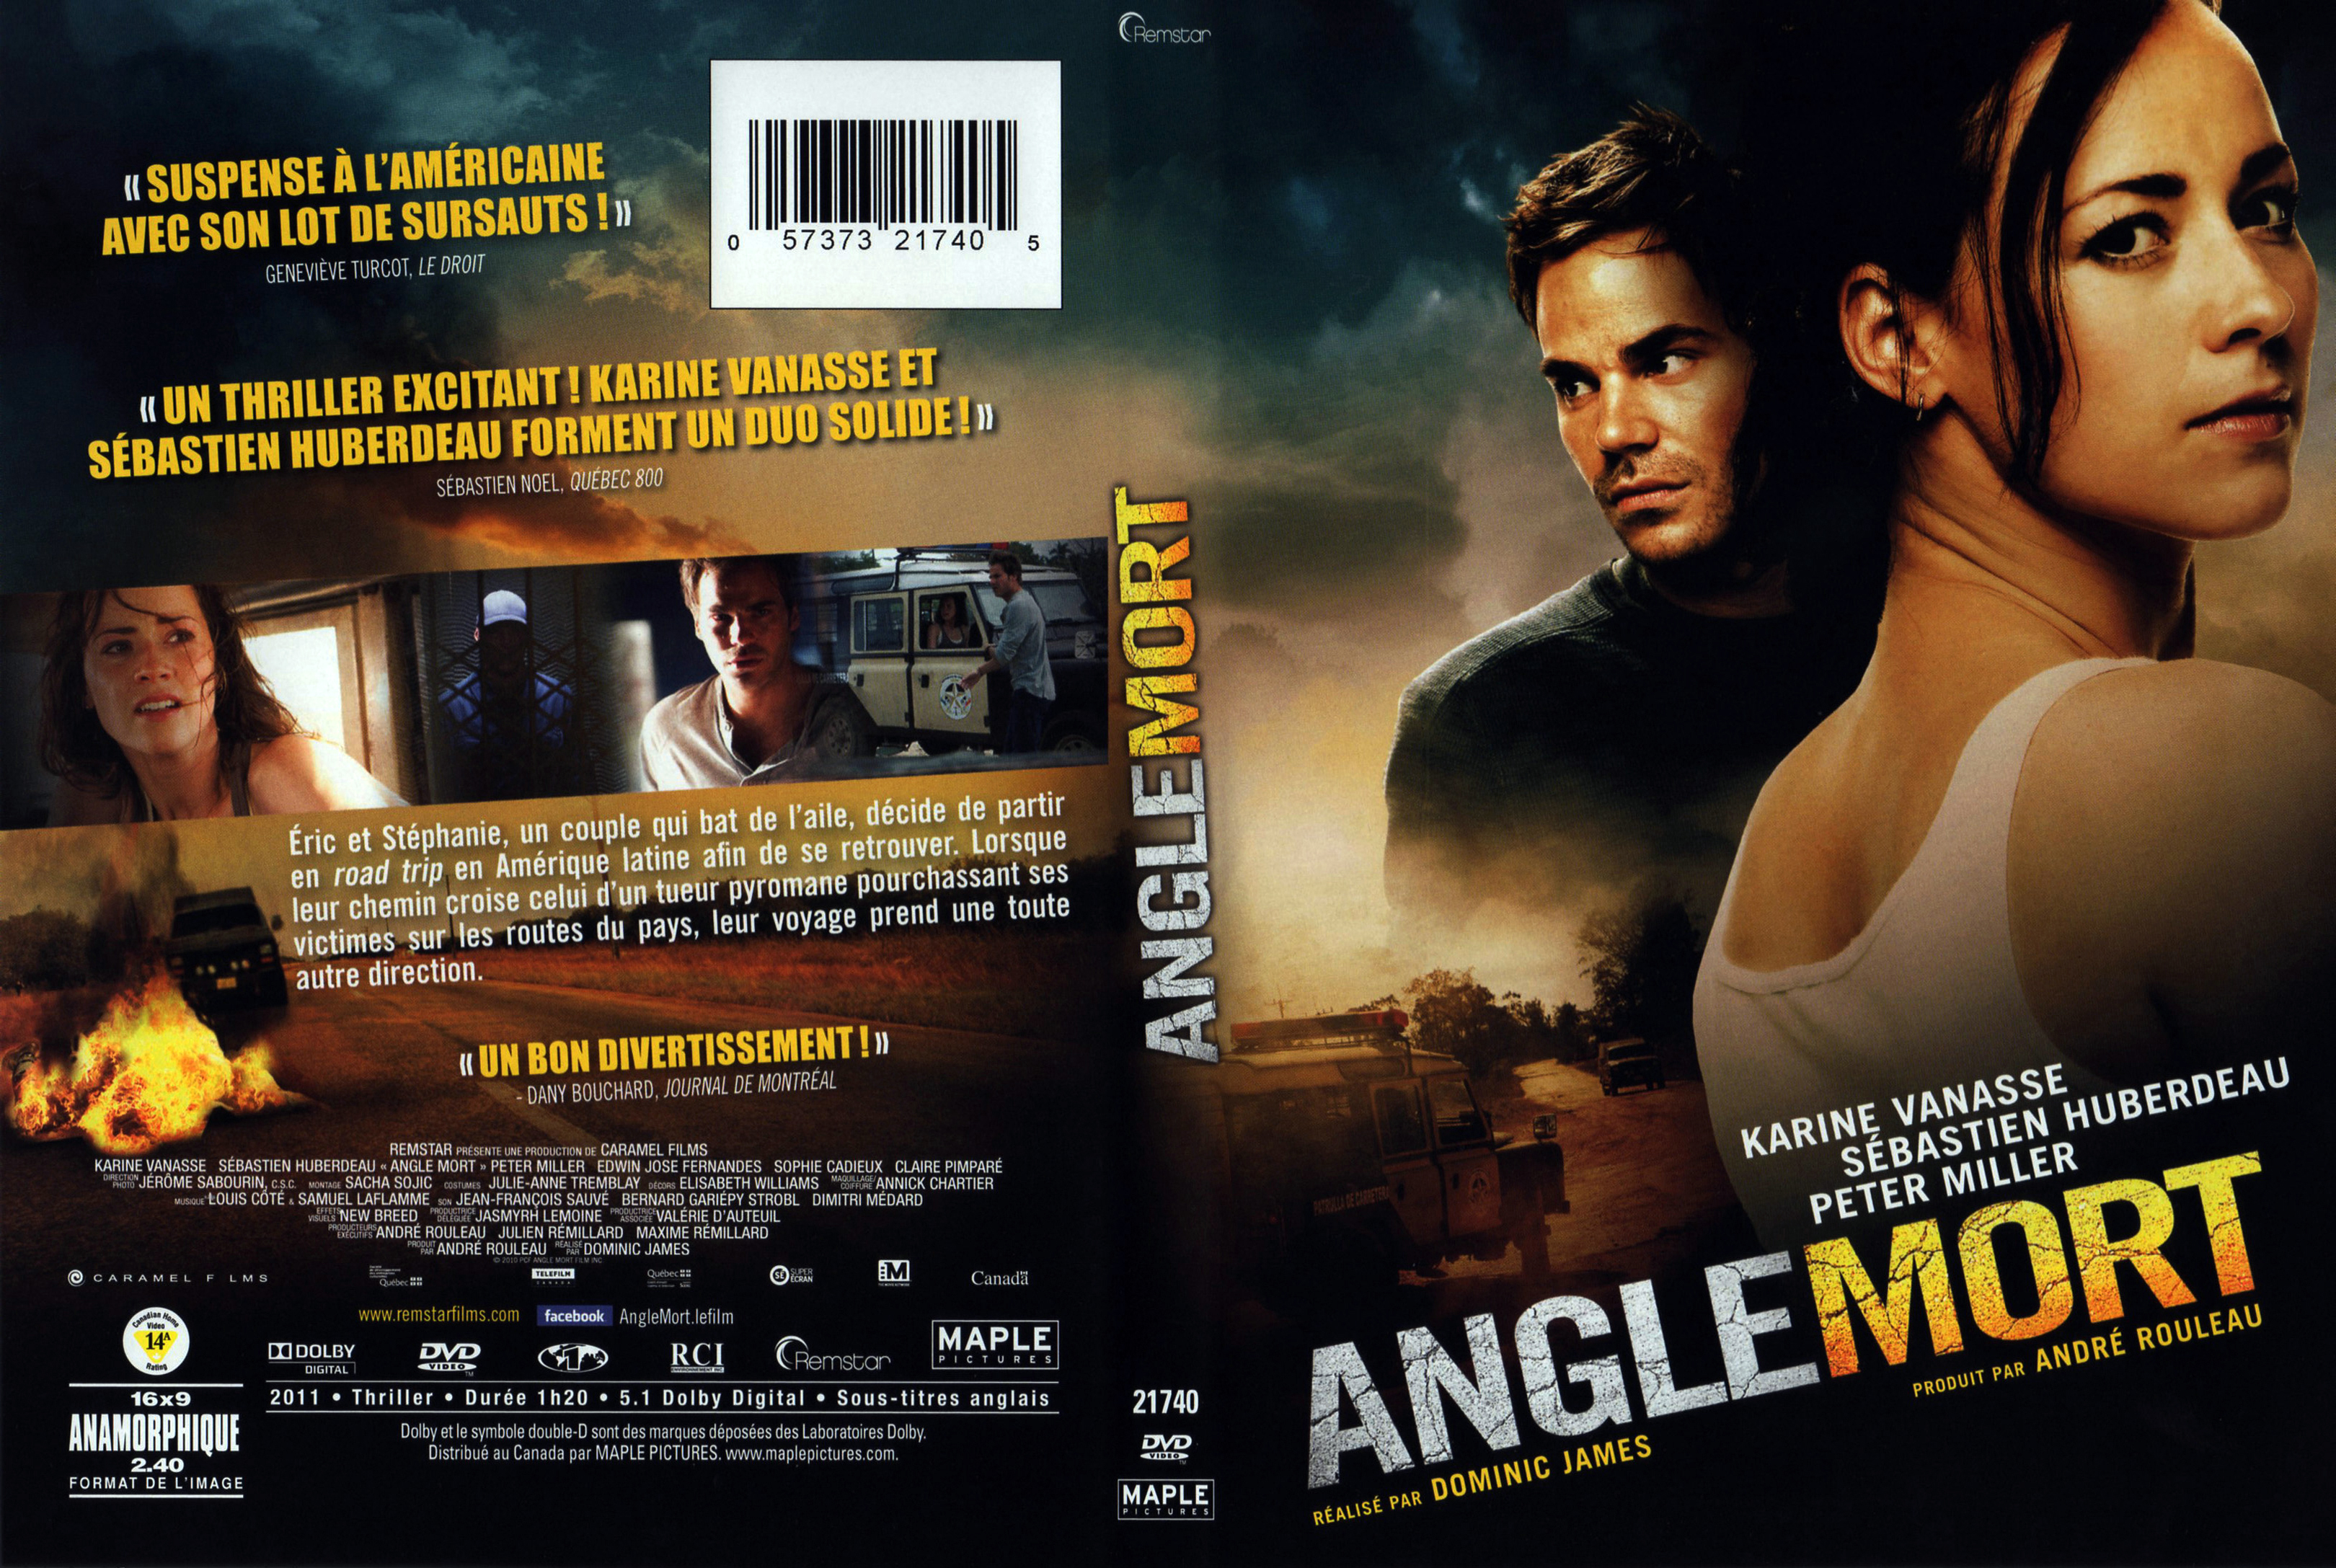 Jaquette DVD Angle Mort (Canadienne)